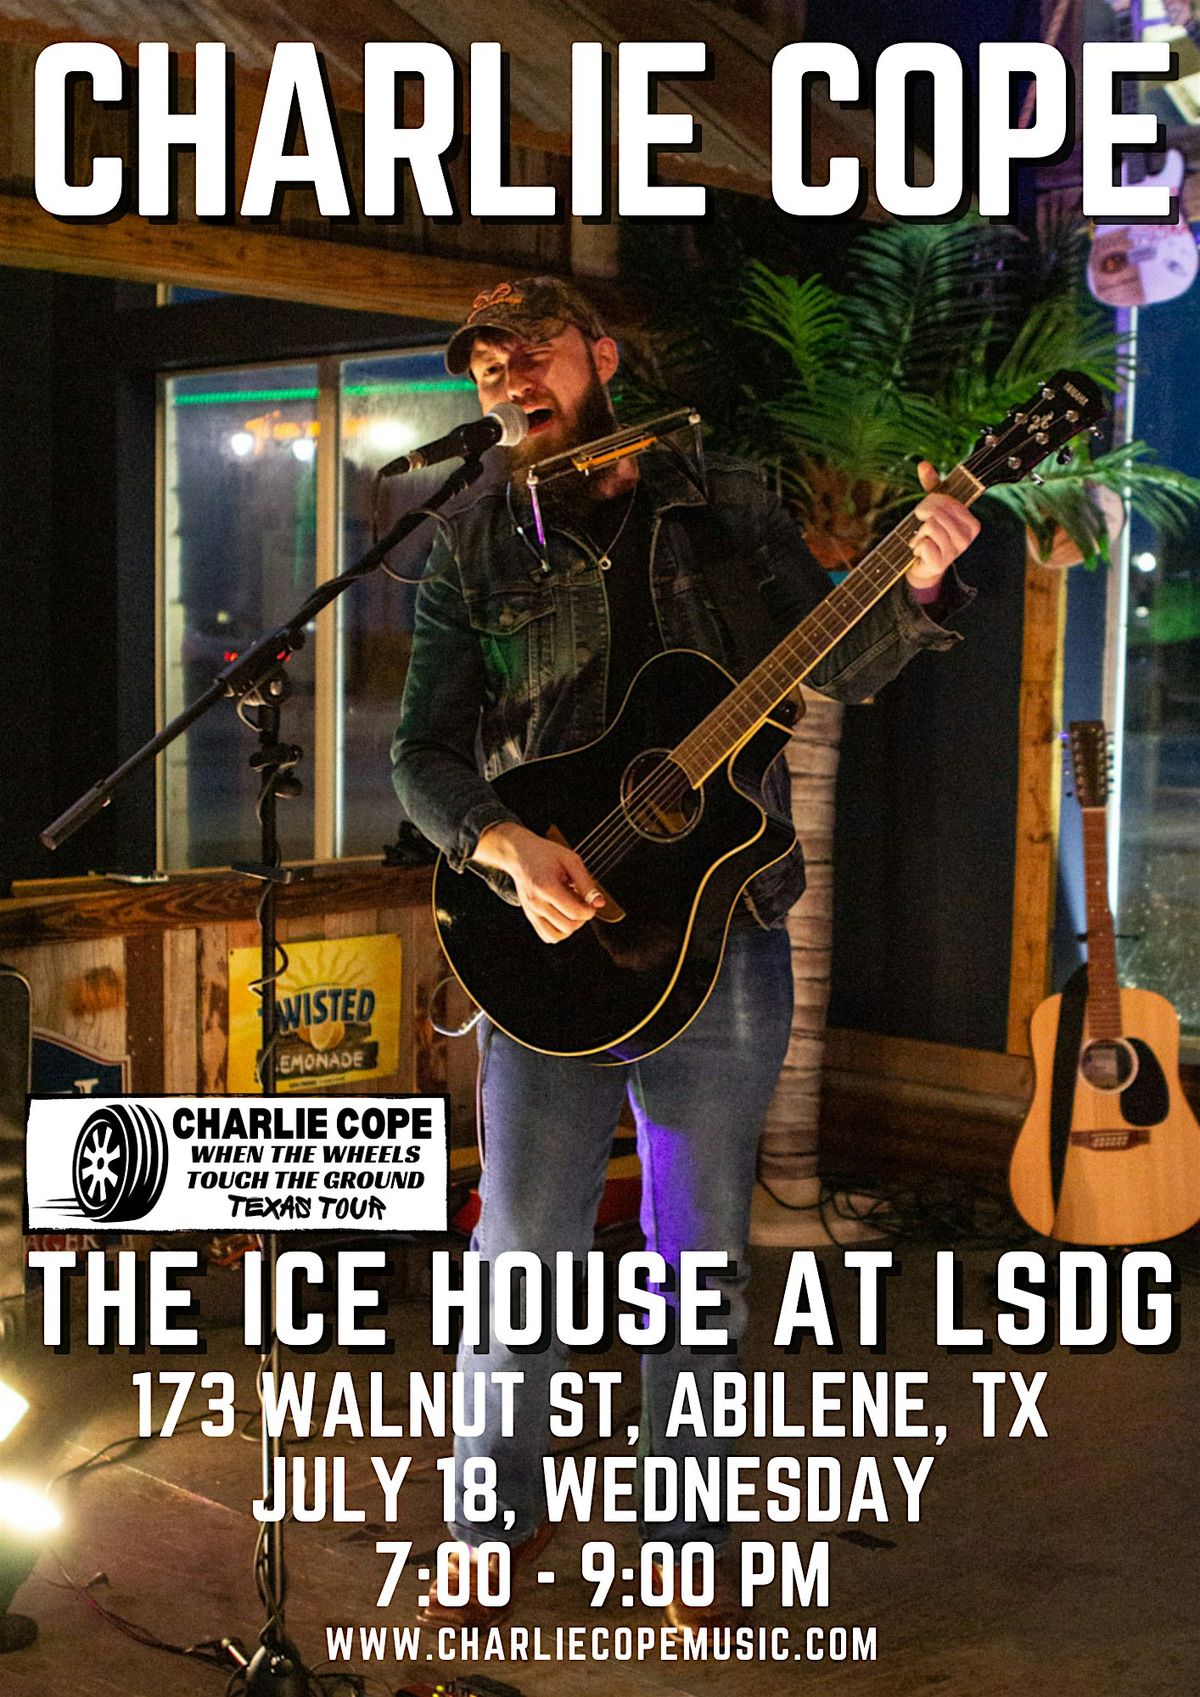 Charlie Cope Live & Acoustic @ The Ice House at LSDG